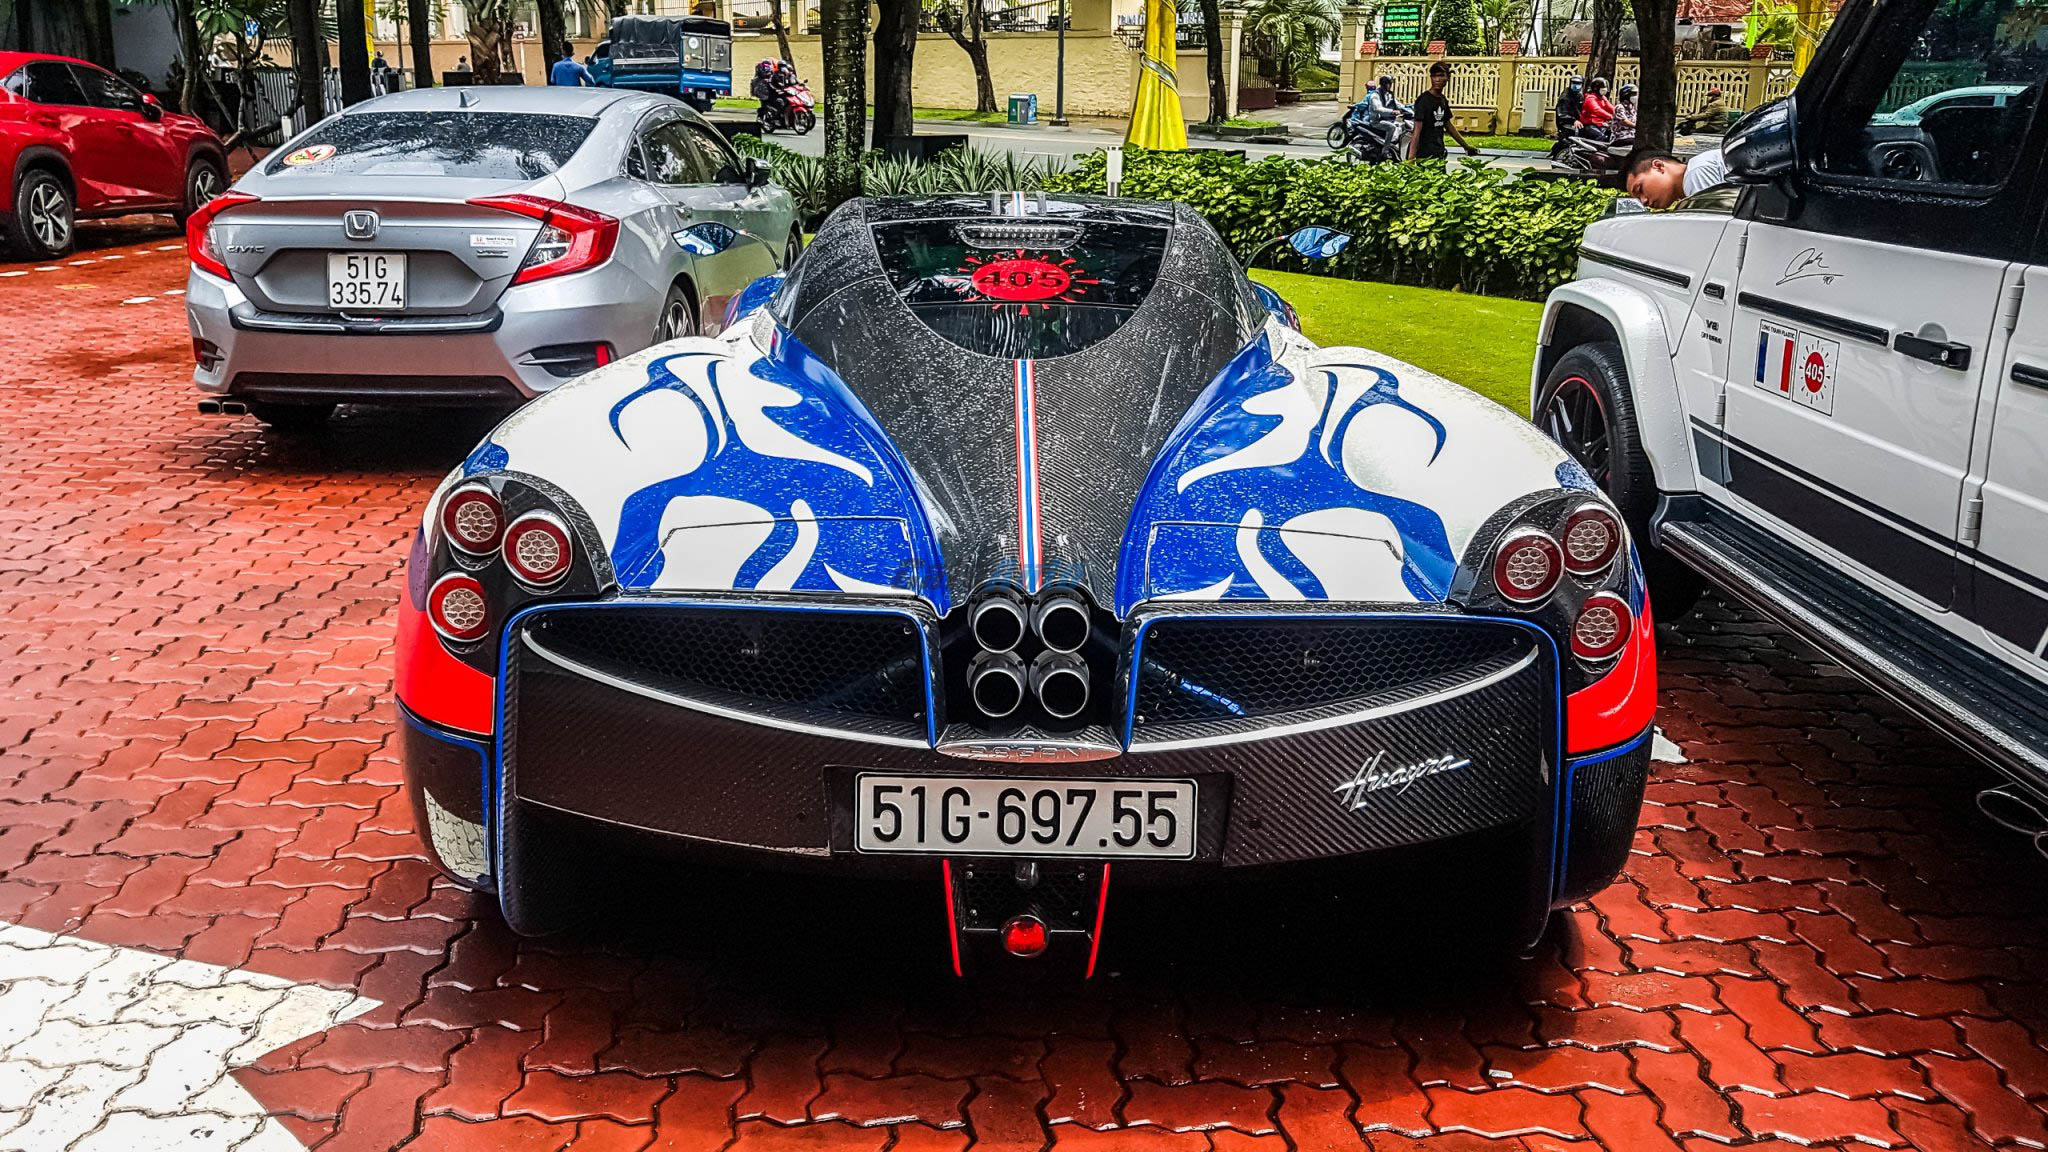 paganihuayra-cafeautovn-14